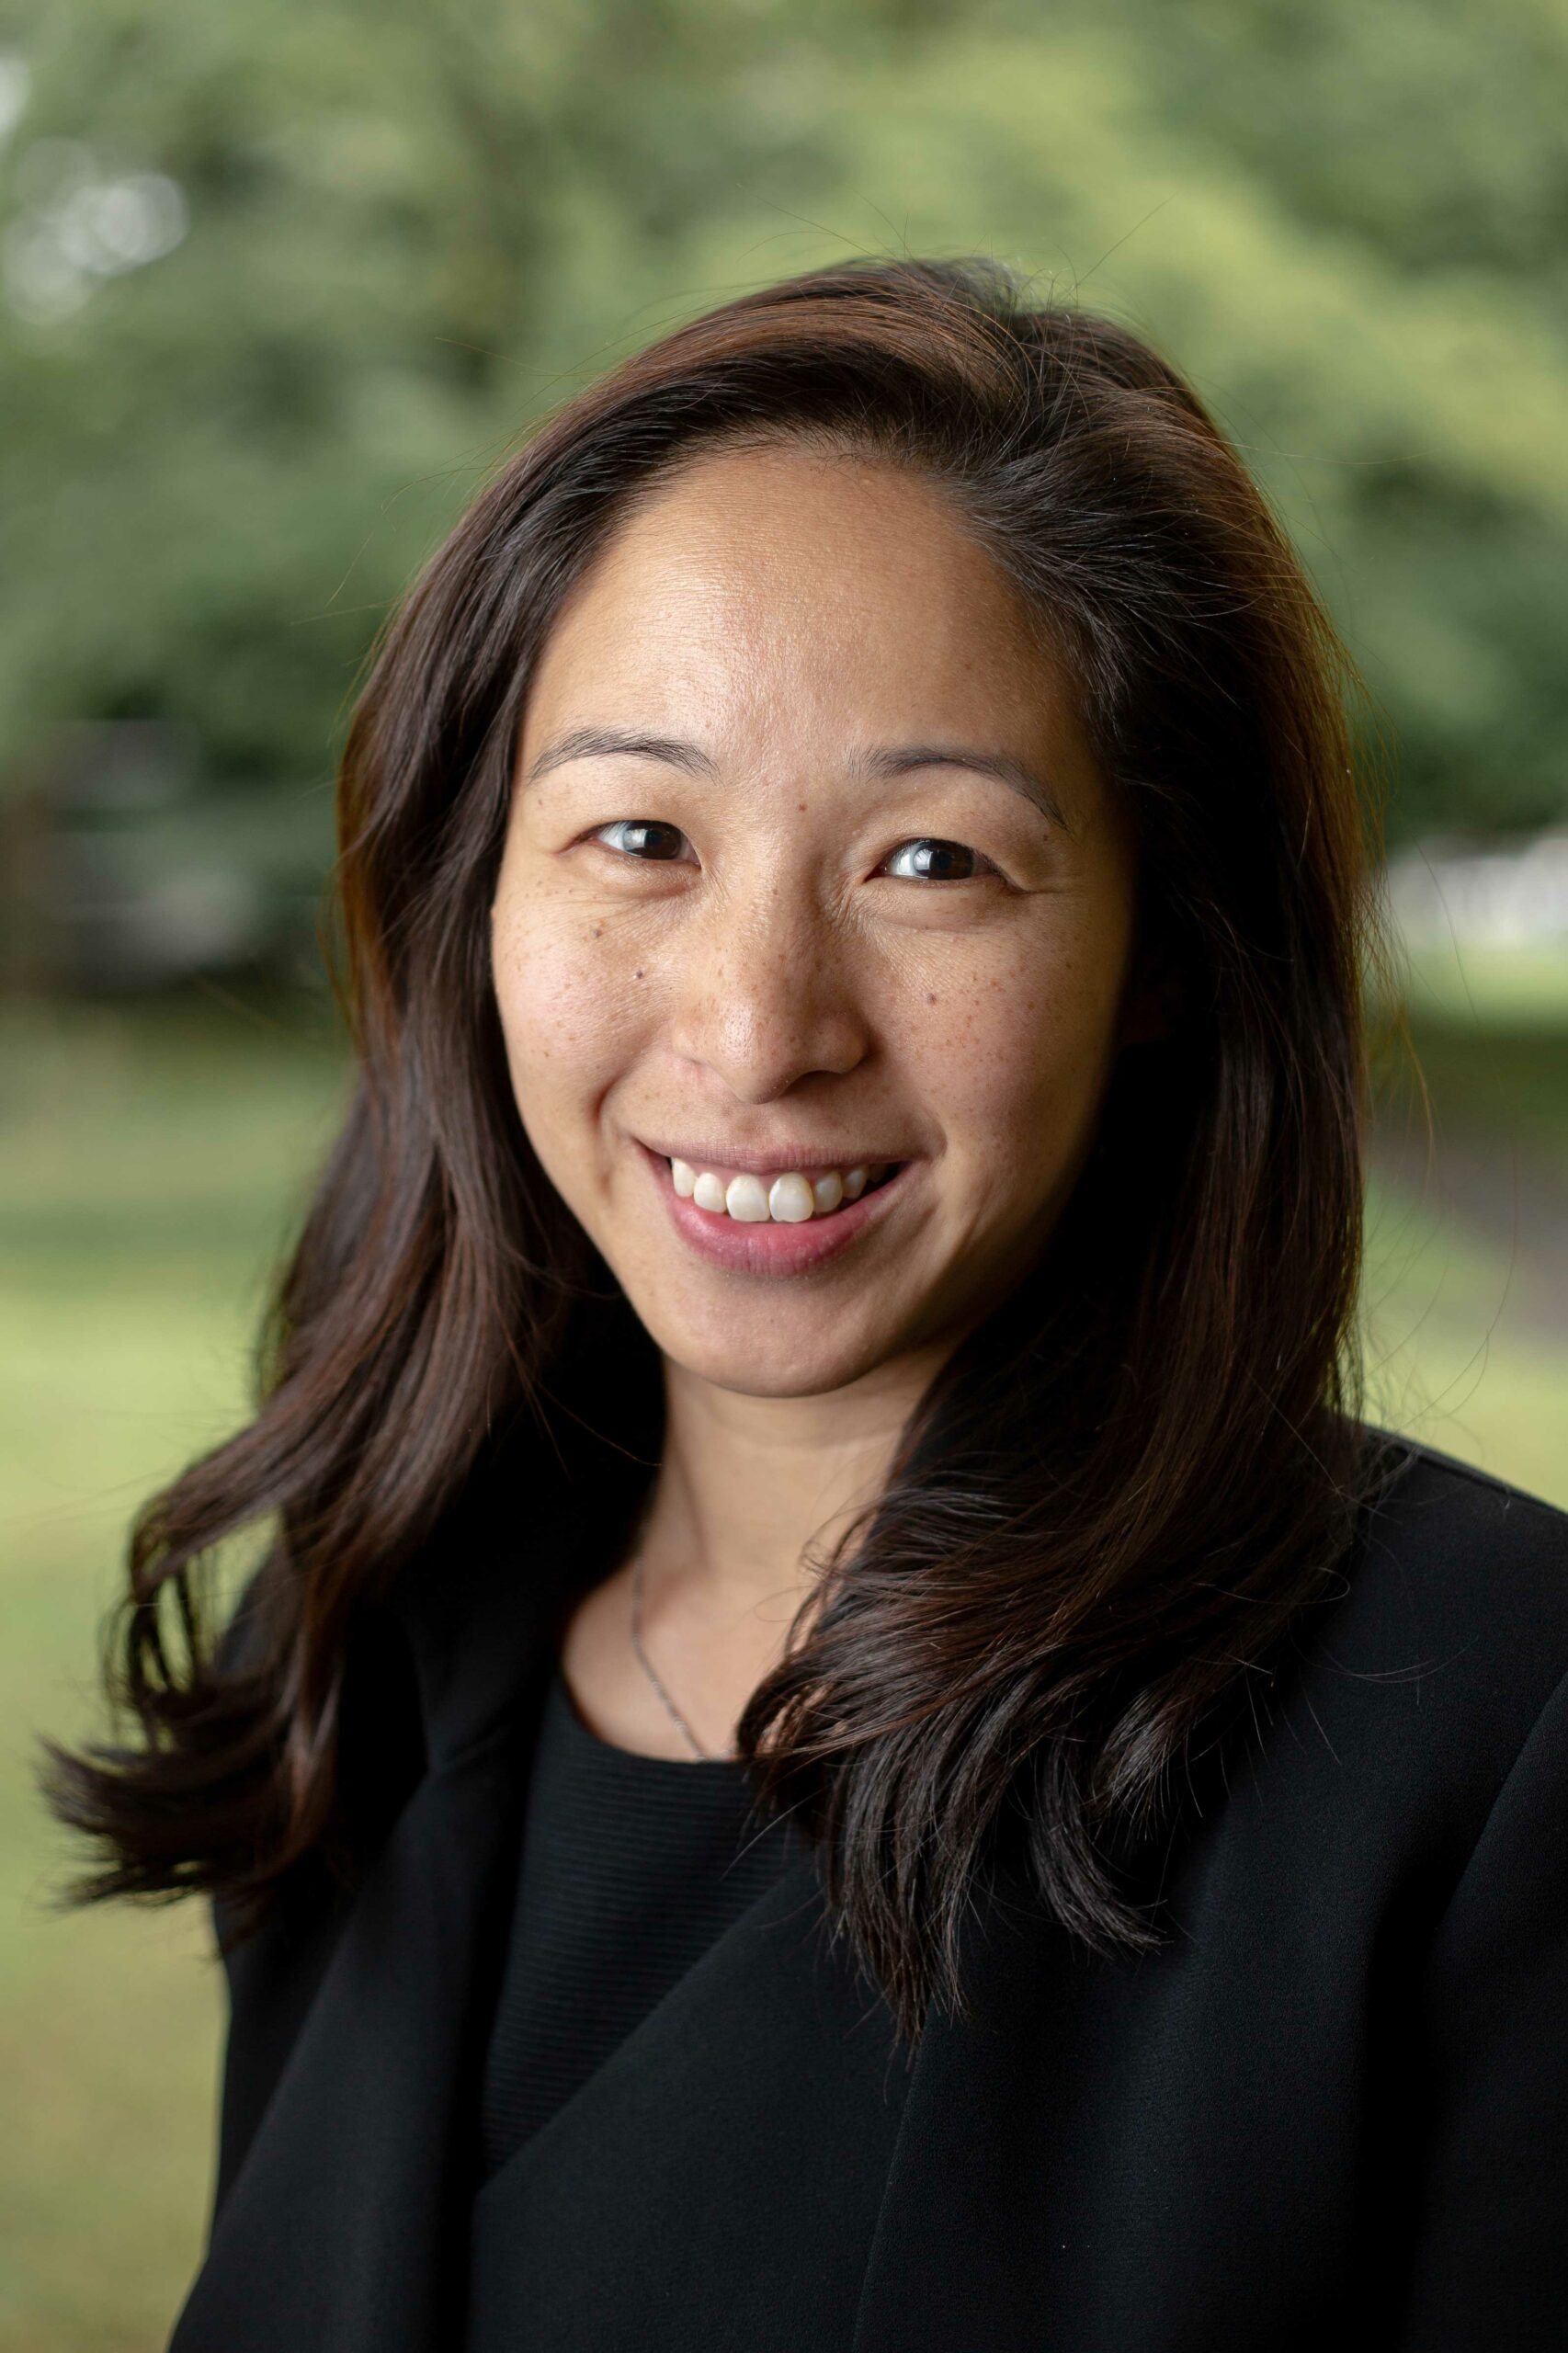 A photograph of Rachel Fung—a Civil and Criminal Higher Rights Advocate